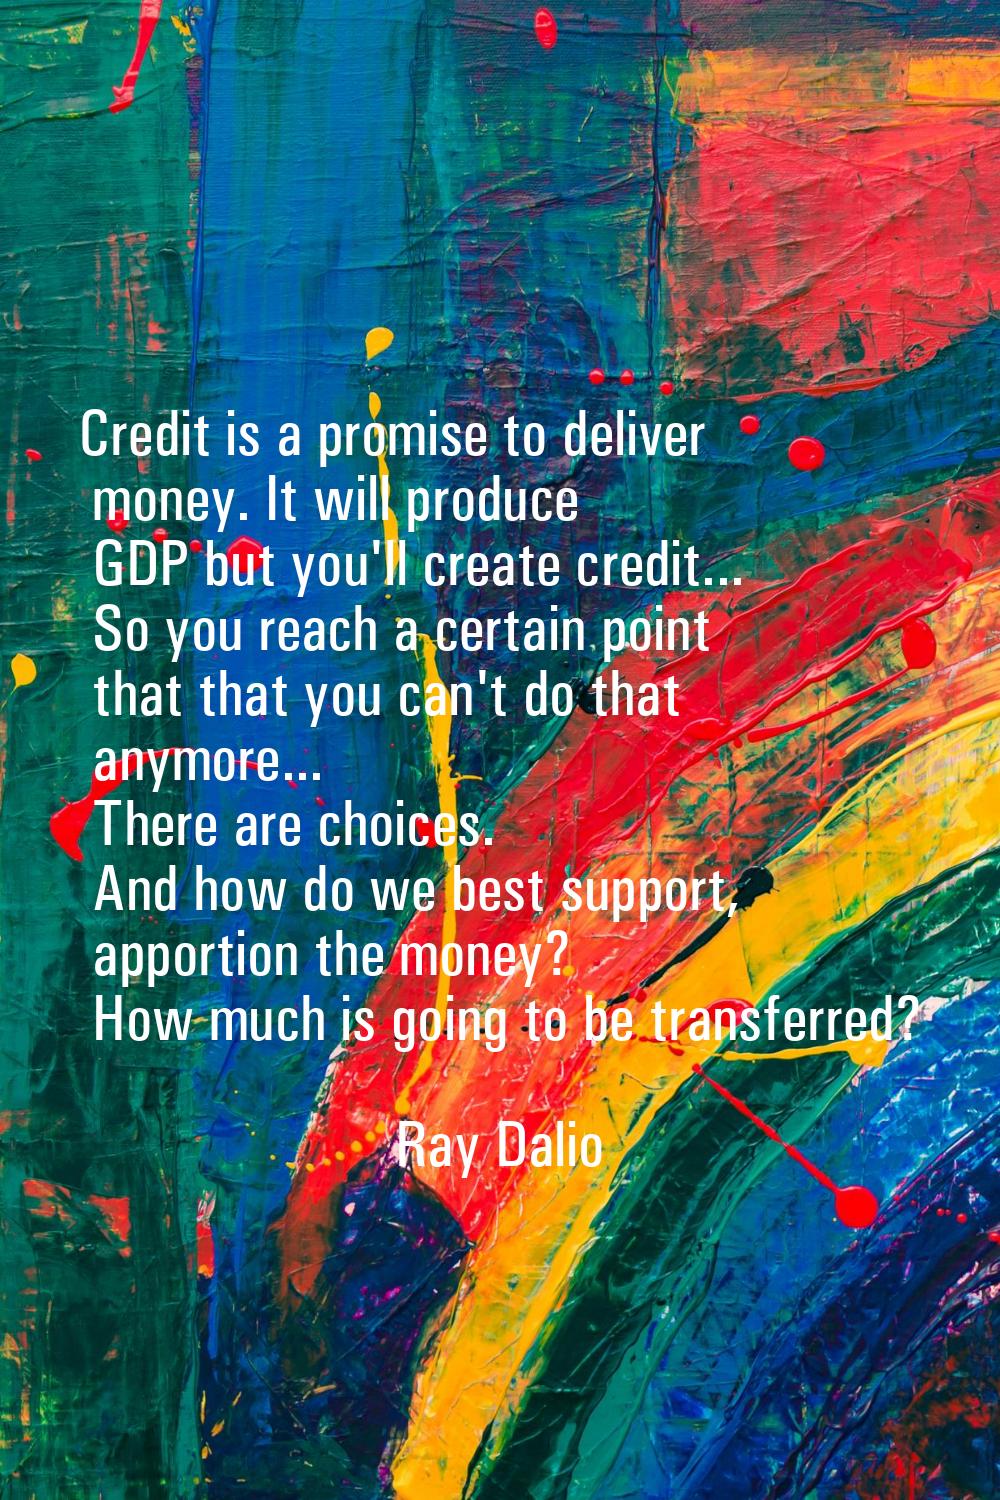 Credit is a promise to deliver money. It will produce GDP but you'll create credit... So you reach 